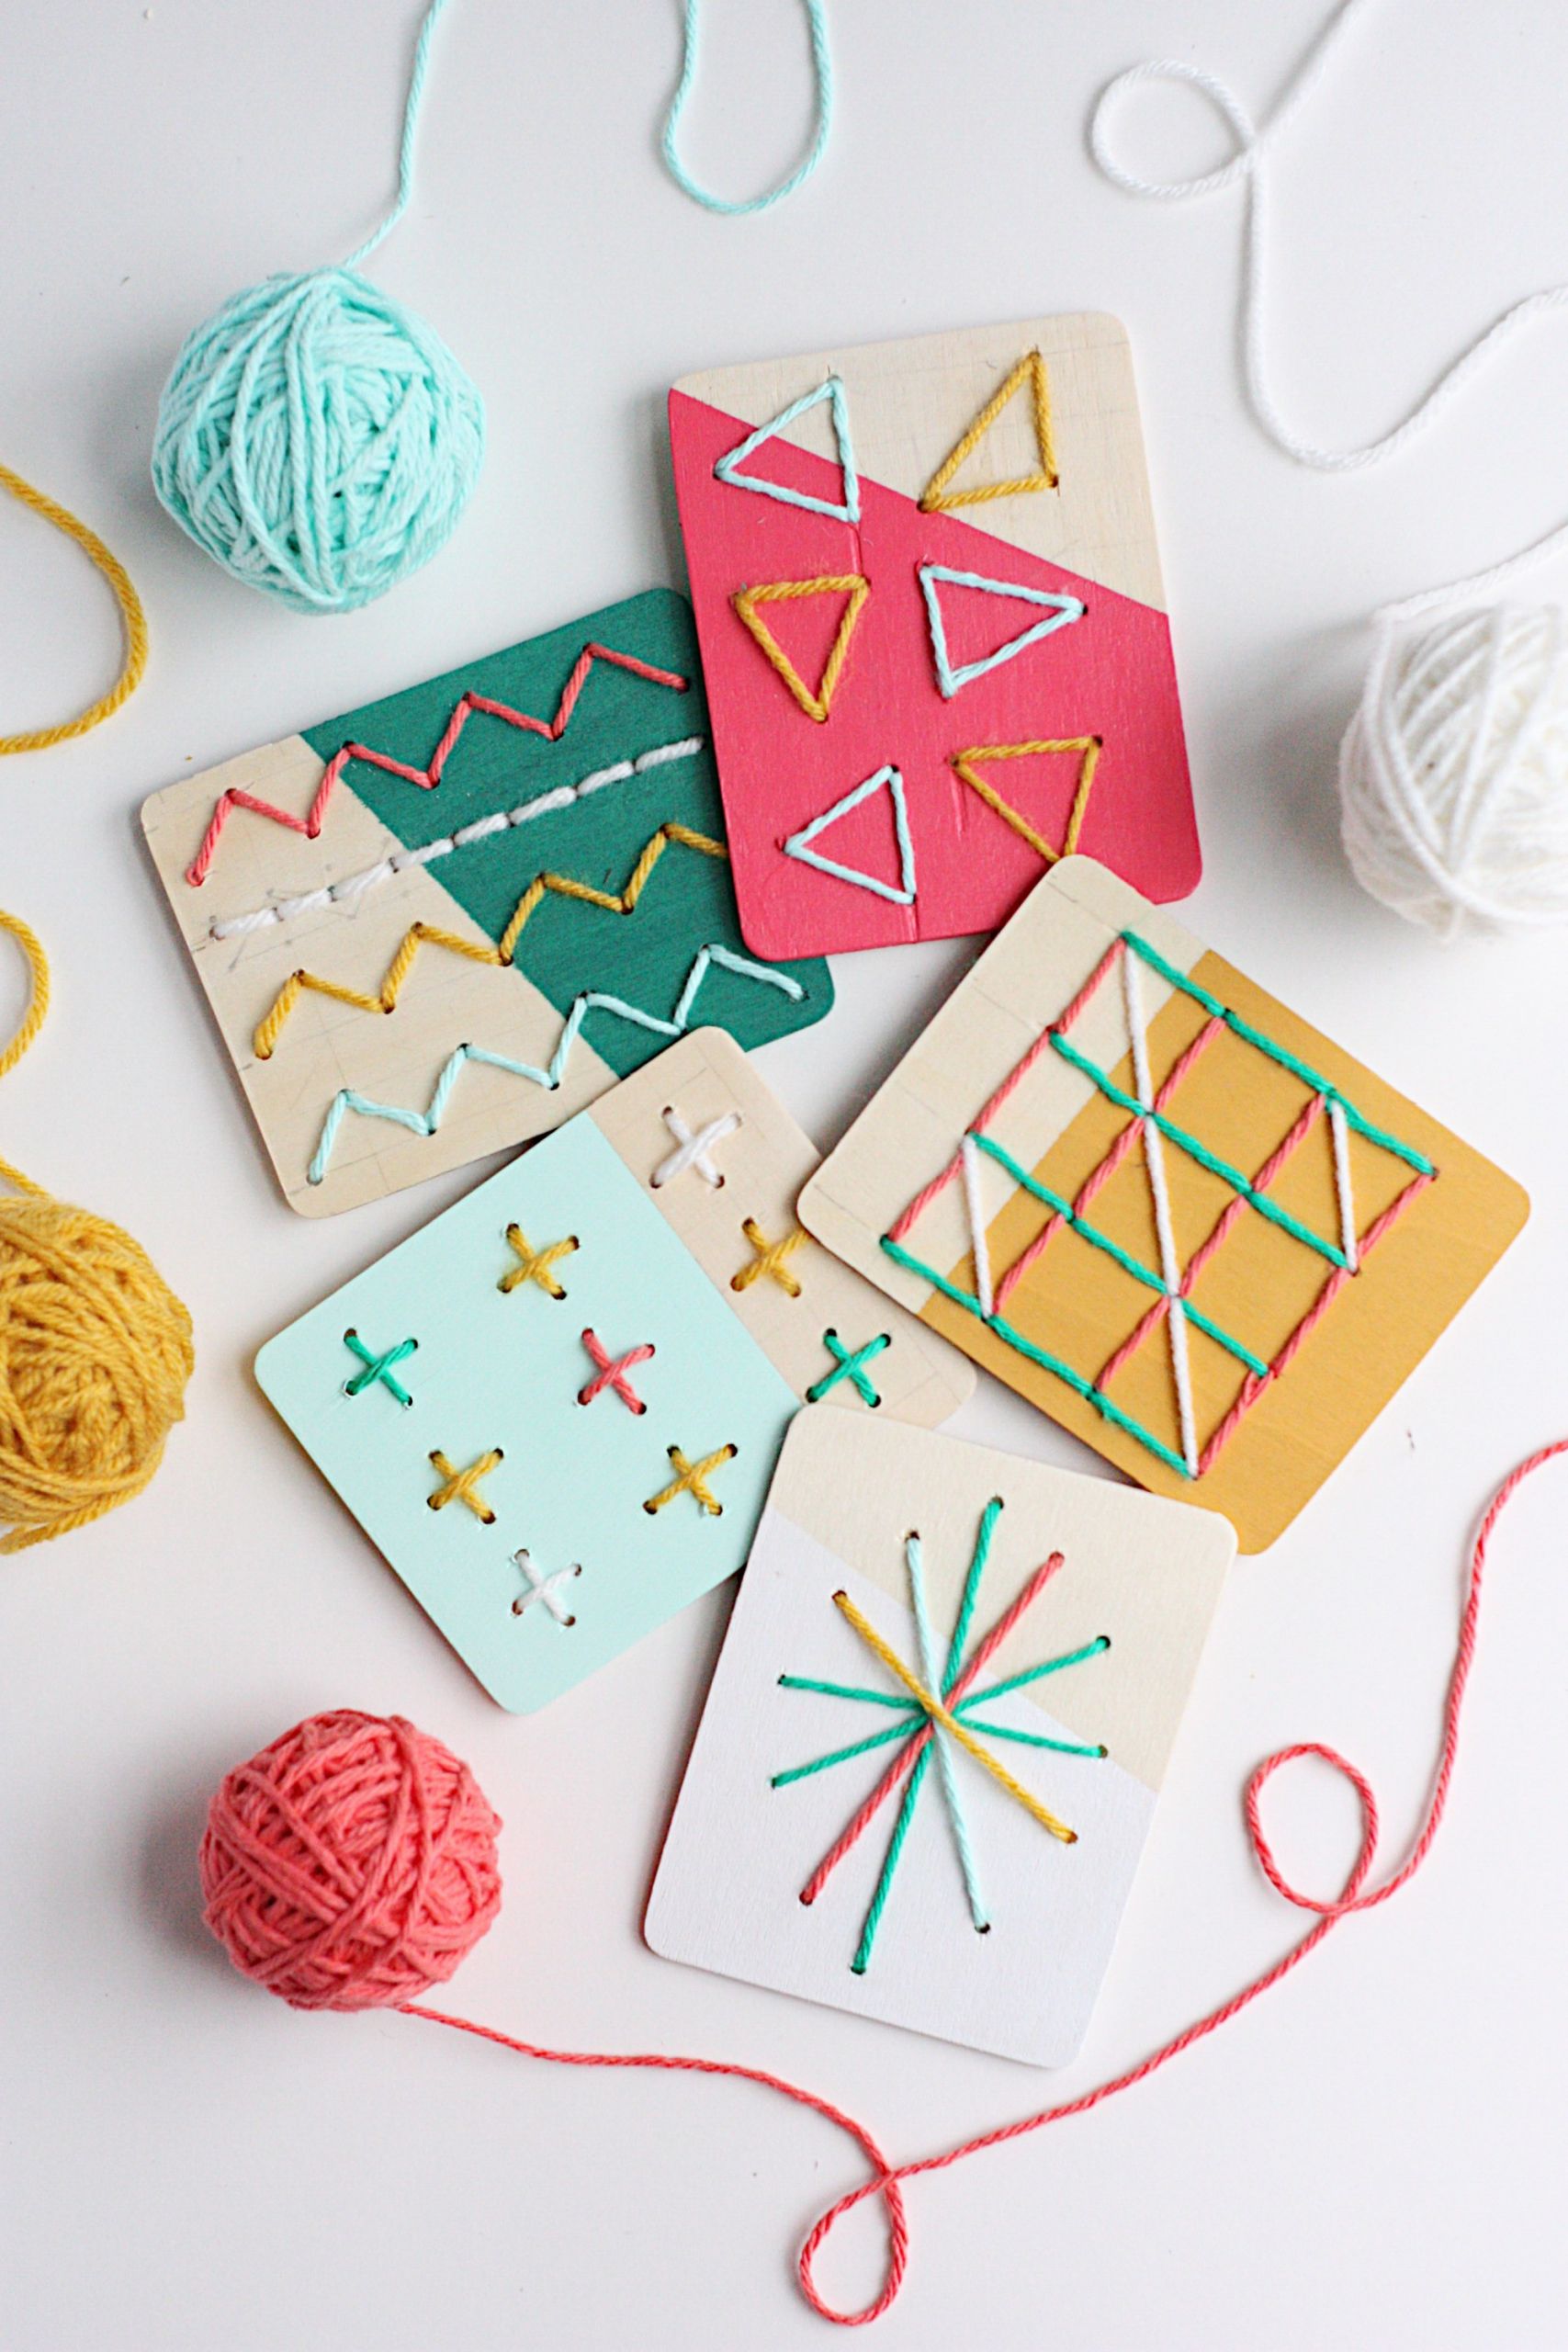 DIY Projects Kids
 11 DIY Yarn Crafts That Will Amaze Your Kids Shelterness